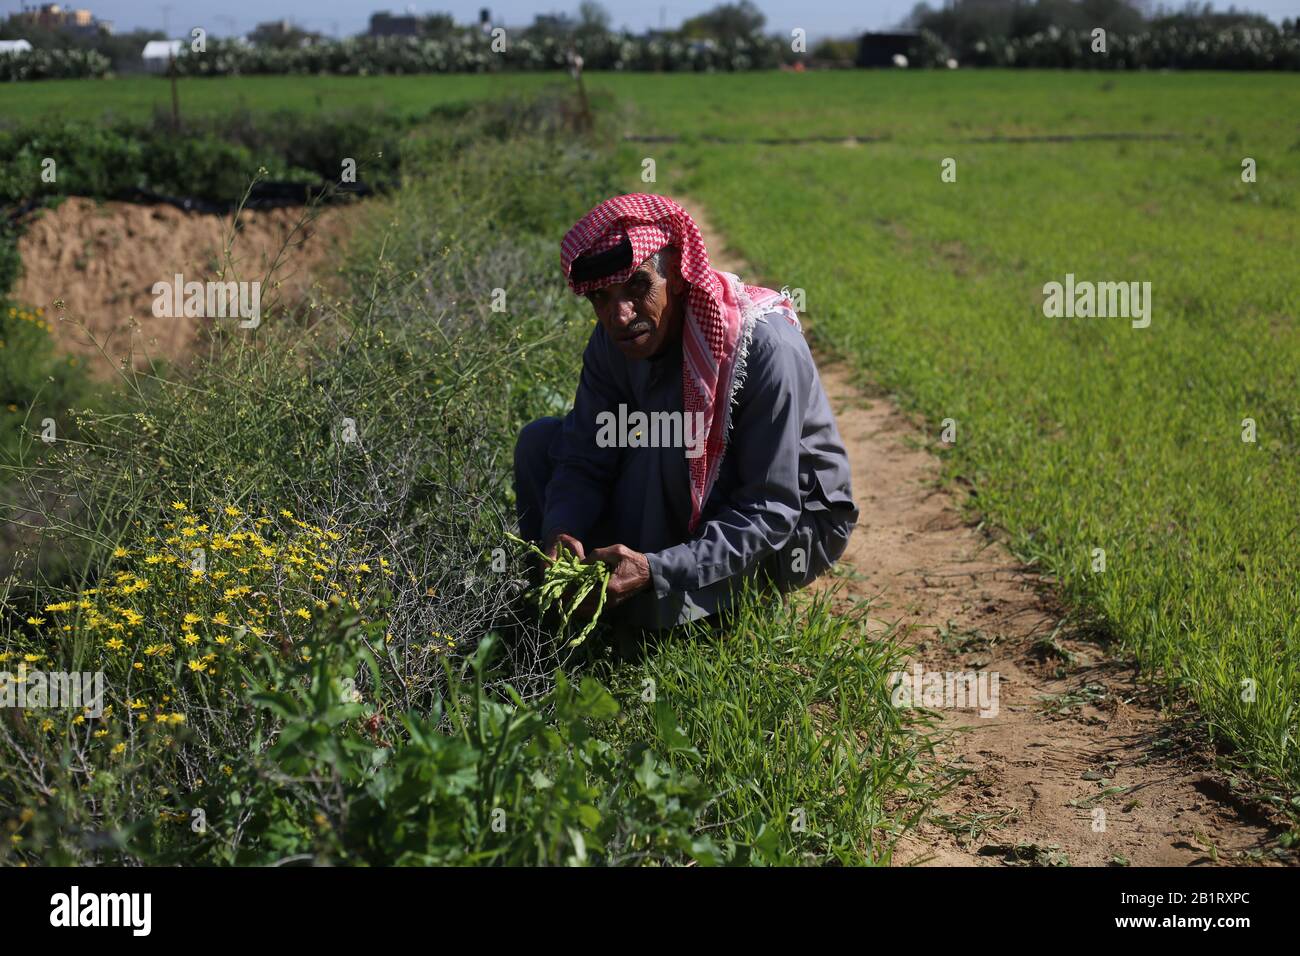 Gaza. 27th Feb, 2020. Palestinian farmer Suleiman Qudaih harvests wild asparagus at his farm in east of the southern Gaza Strip city of Khan Younis on Feb. 27, 2020. Qudaih said that the wild asparagus can be found among the tall grasses and long-lived plants such as cactus. The man, 73, cooks asparagus with eggs and other dishes to absorb its nourishment. Credit: Khaled Omar/Xinhua/Alamy Live News Stock Photo